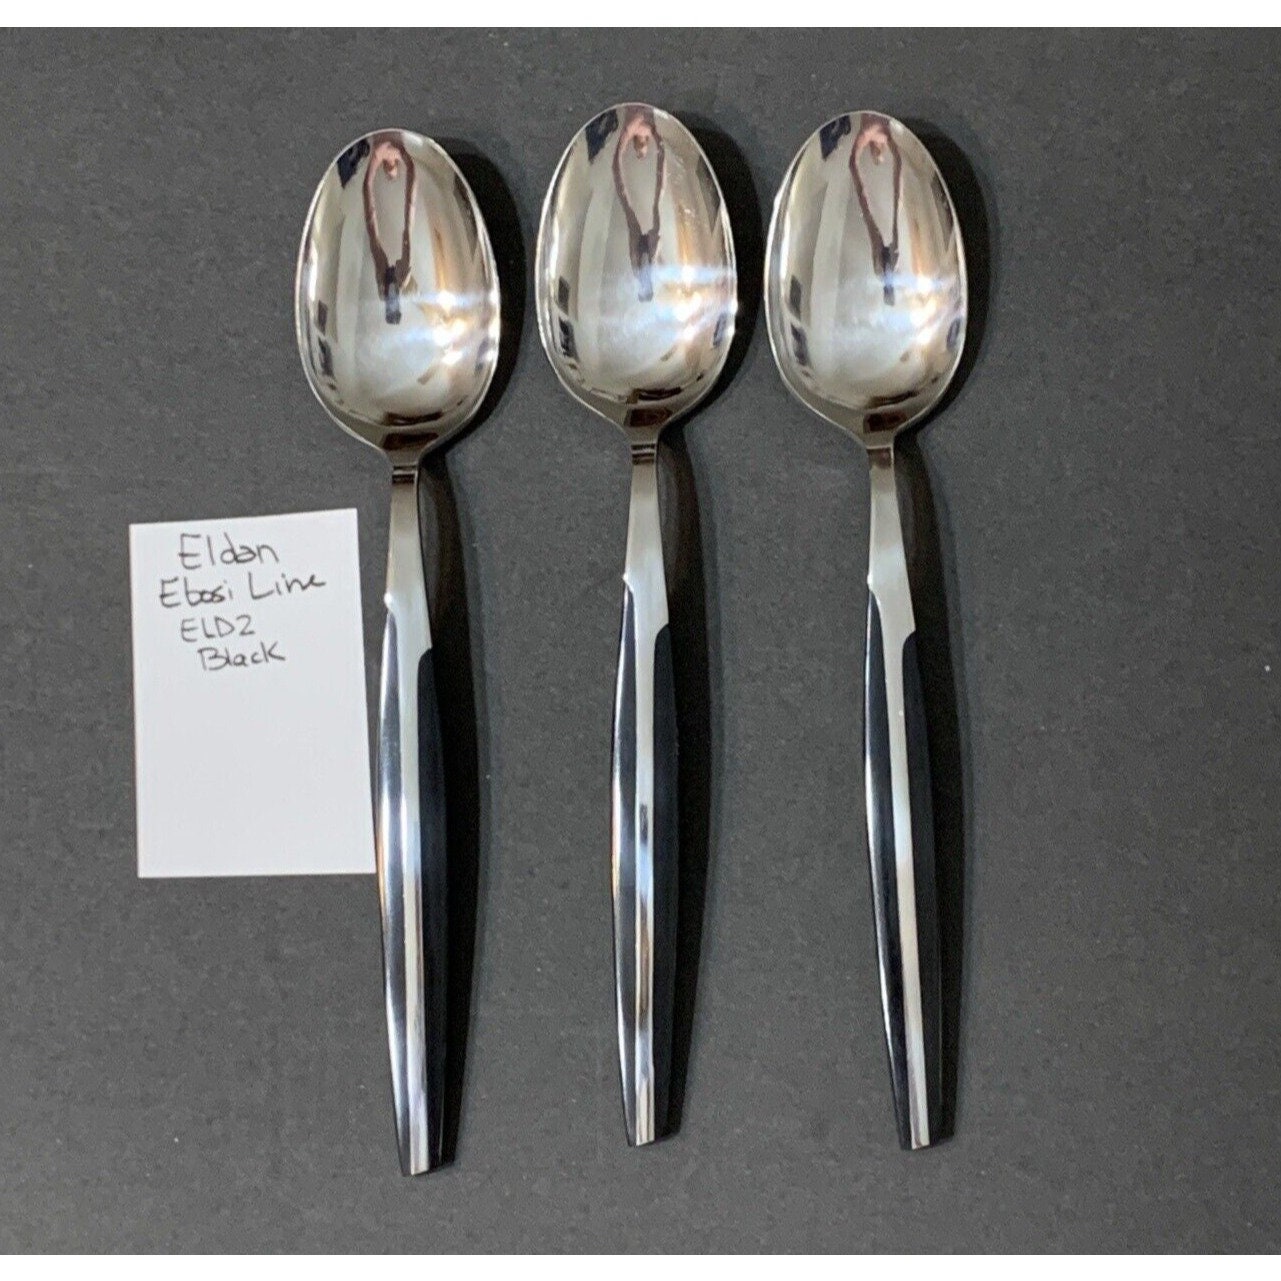 CORSICAN Japan Stainless Steel Black Accent Silverware Flatware CHOICE